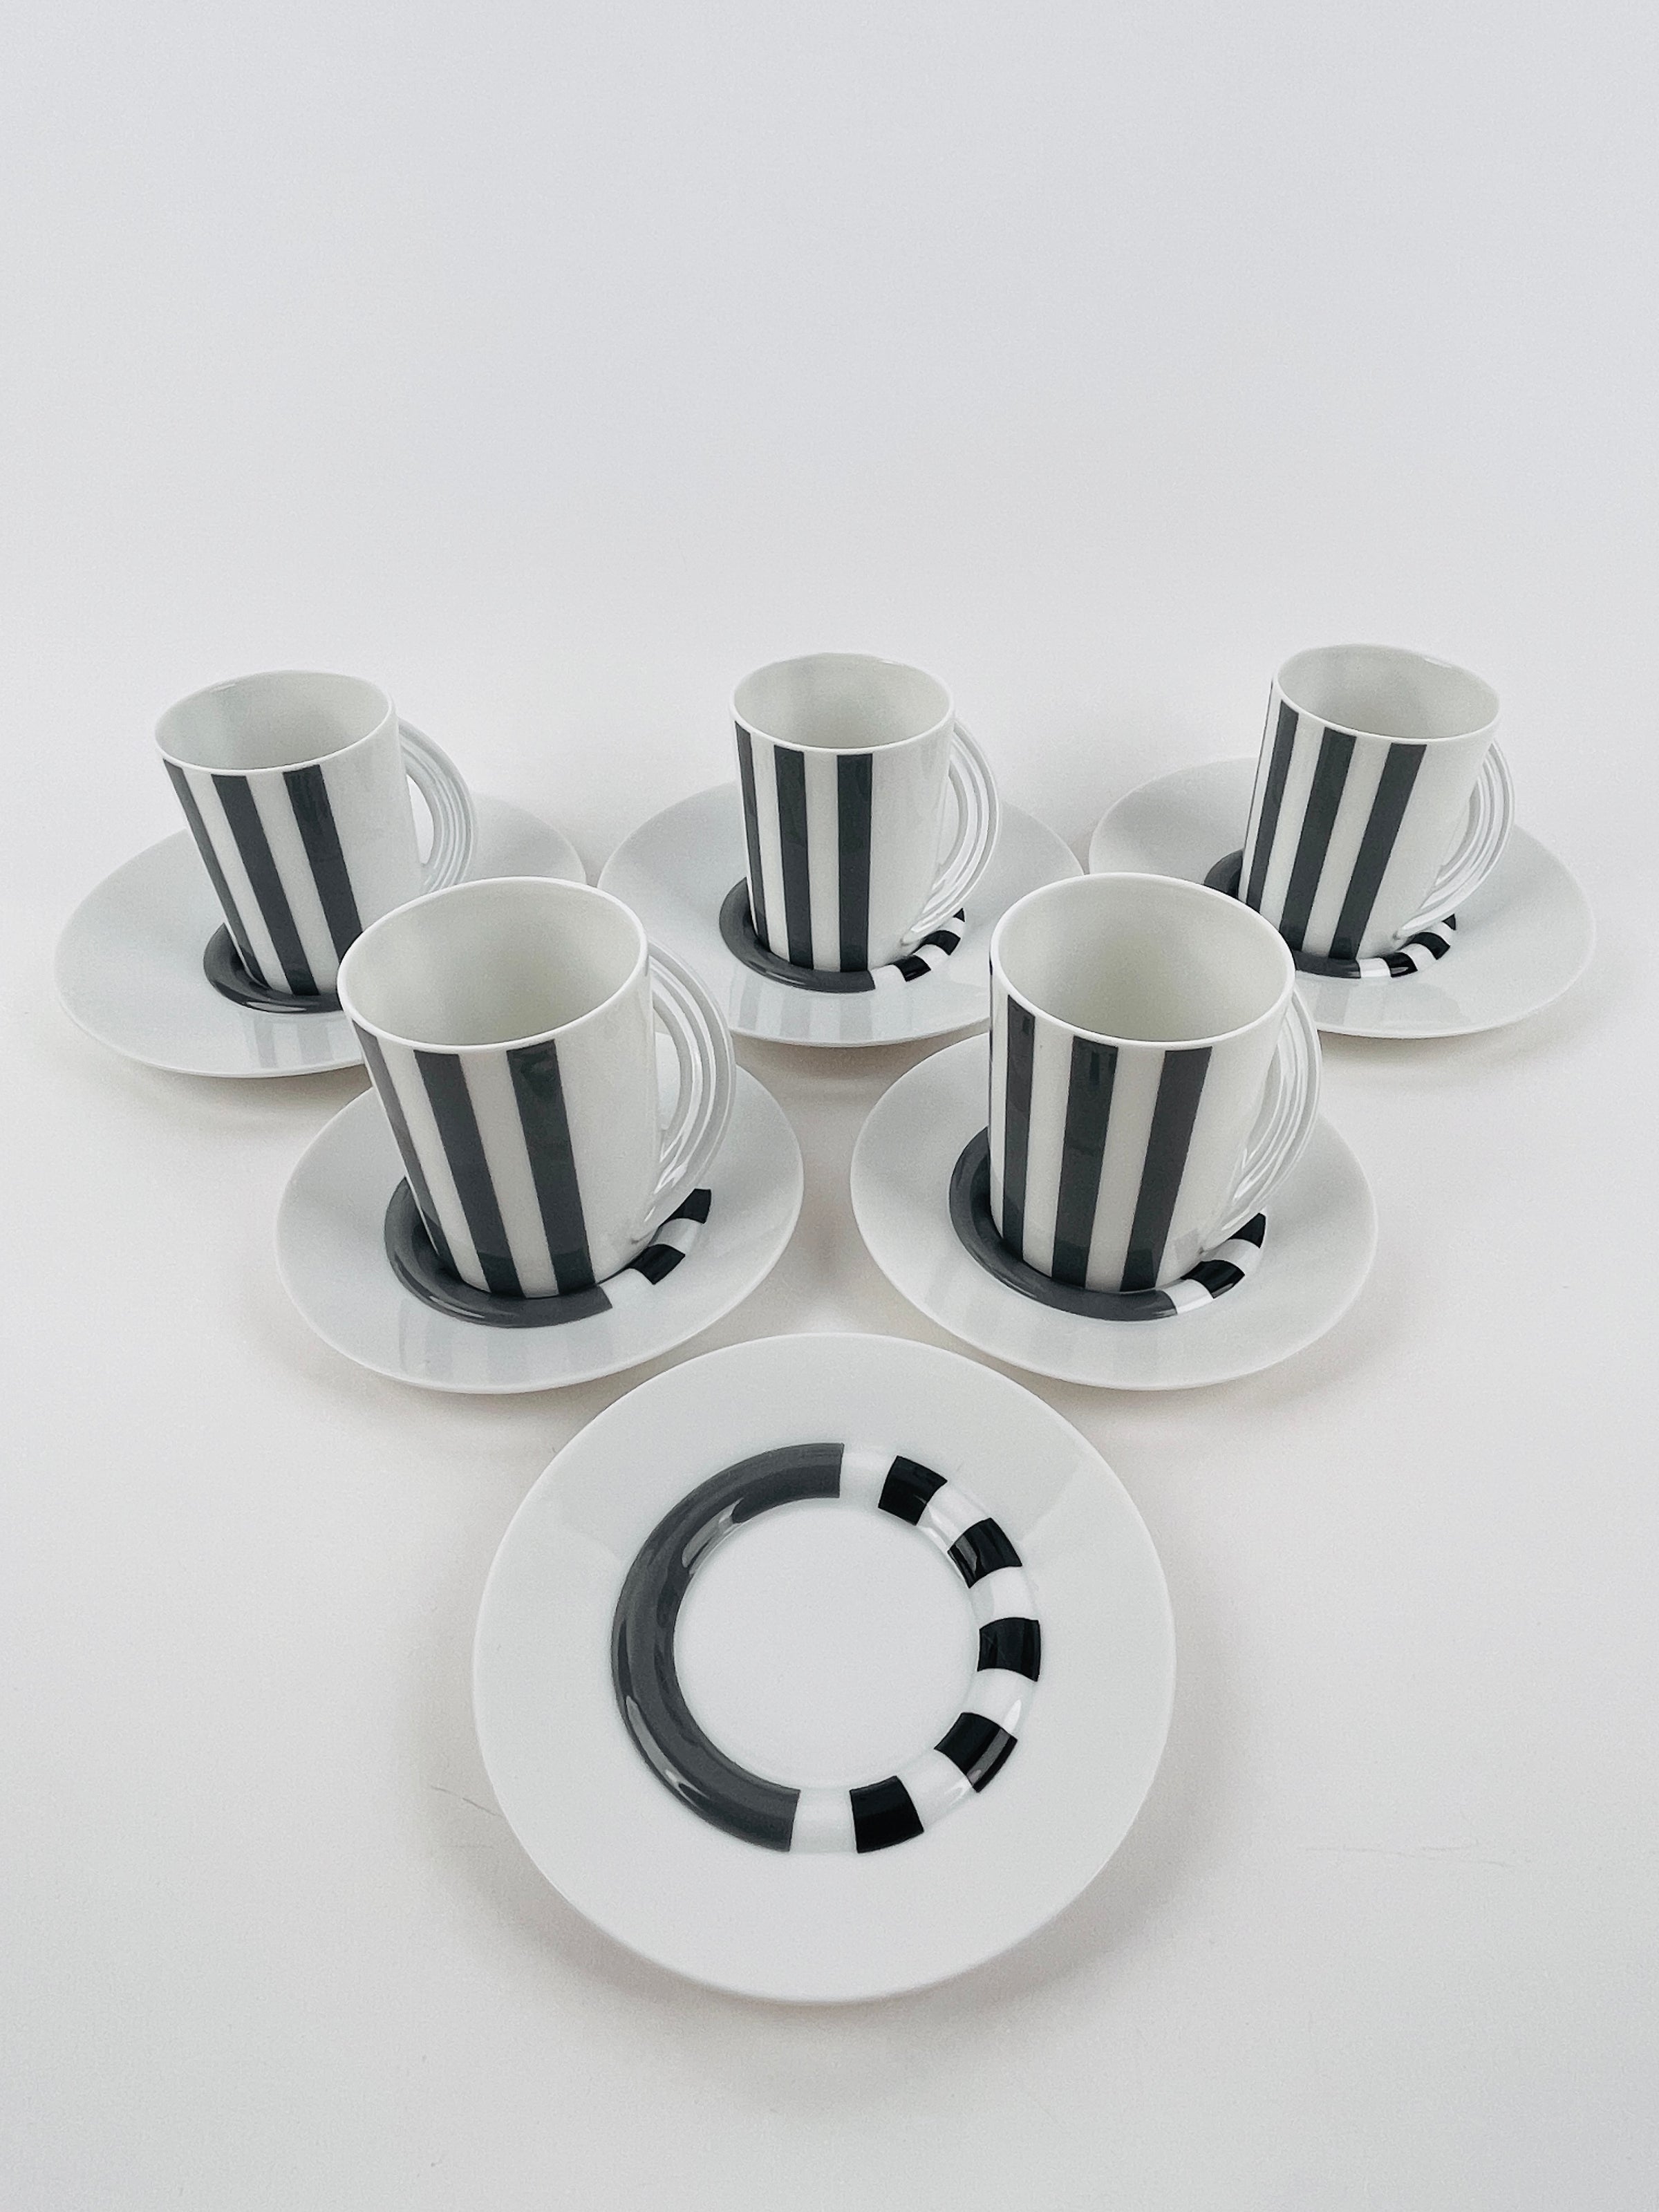 Cupola Espresso Cup & Saucer by Katja Marzahn & Mario Bellini for  Rosenthal, 1970s, Set of 2 for sale at Pamono